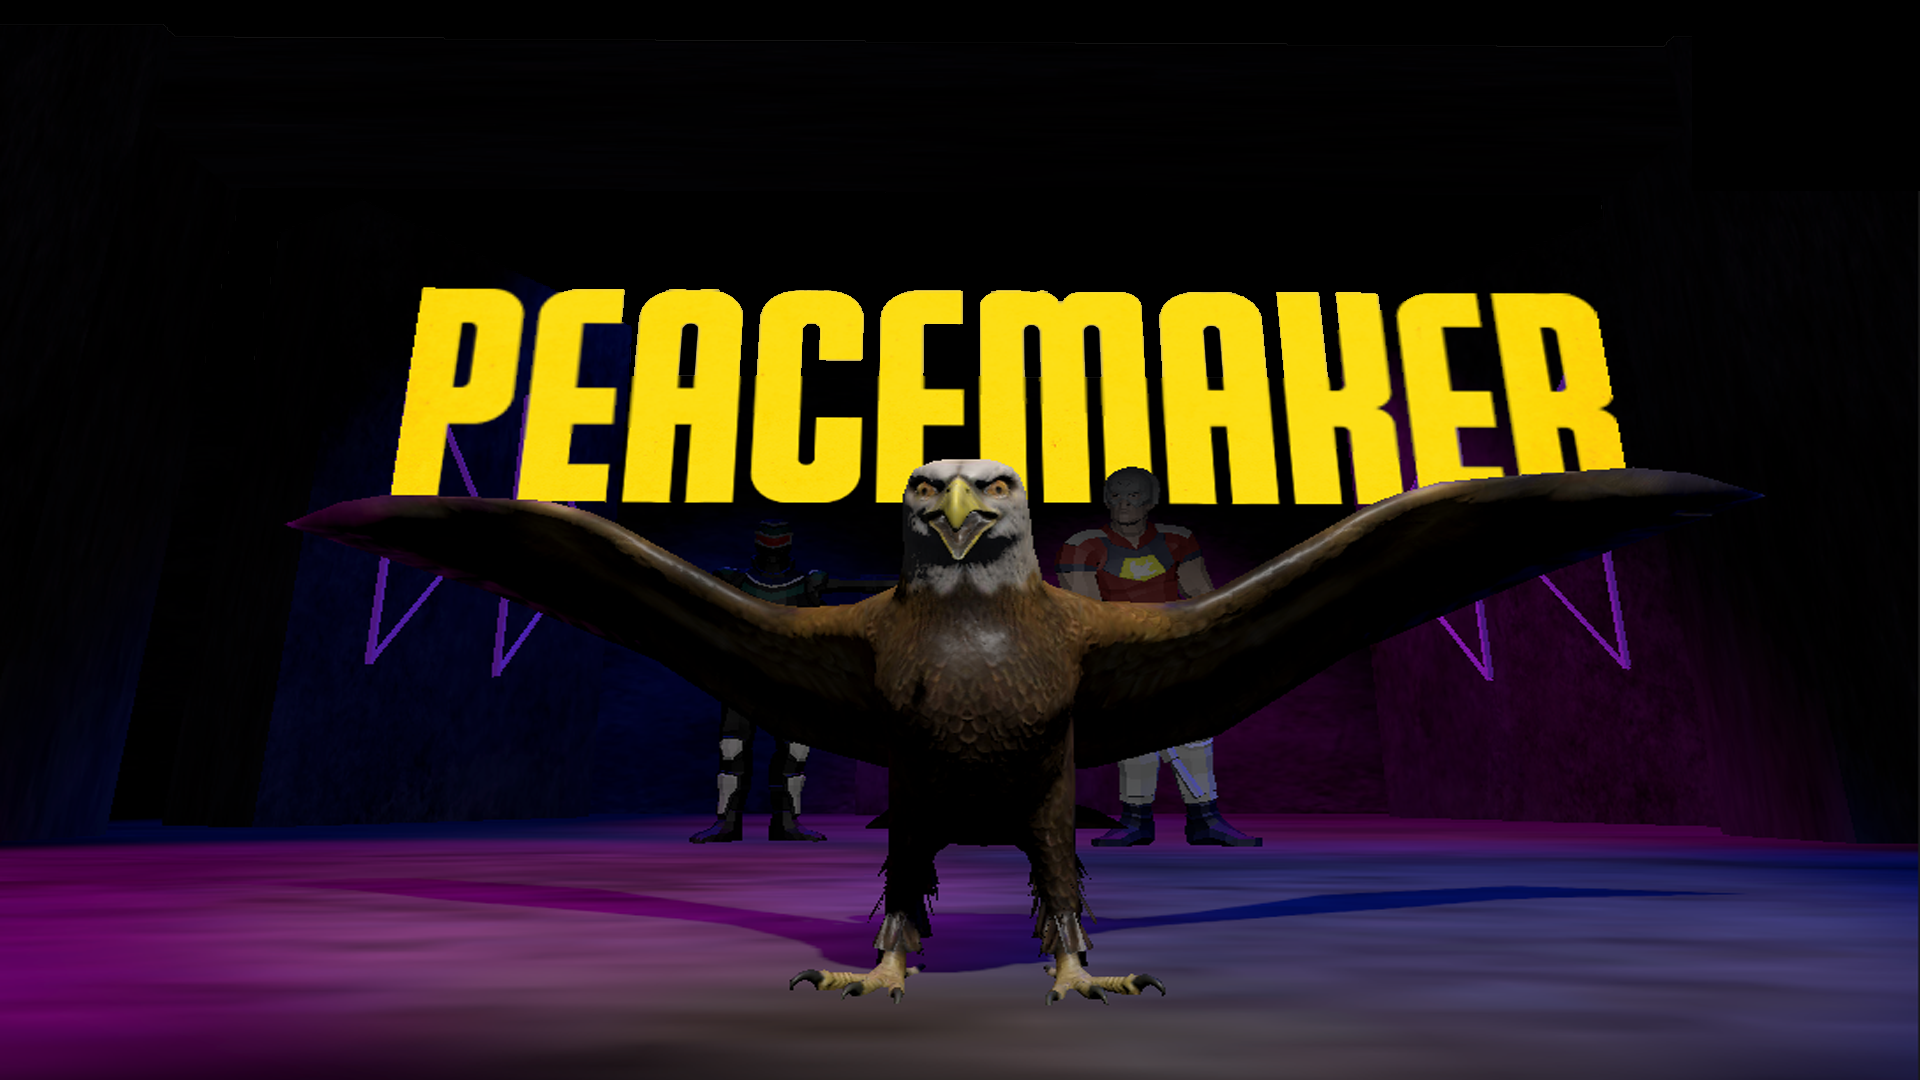 Peacemaker VR